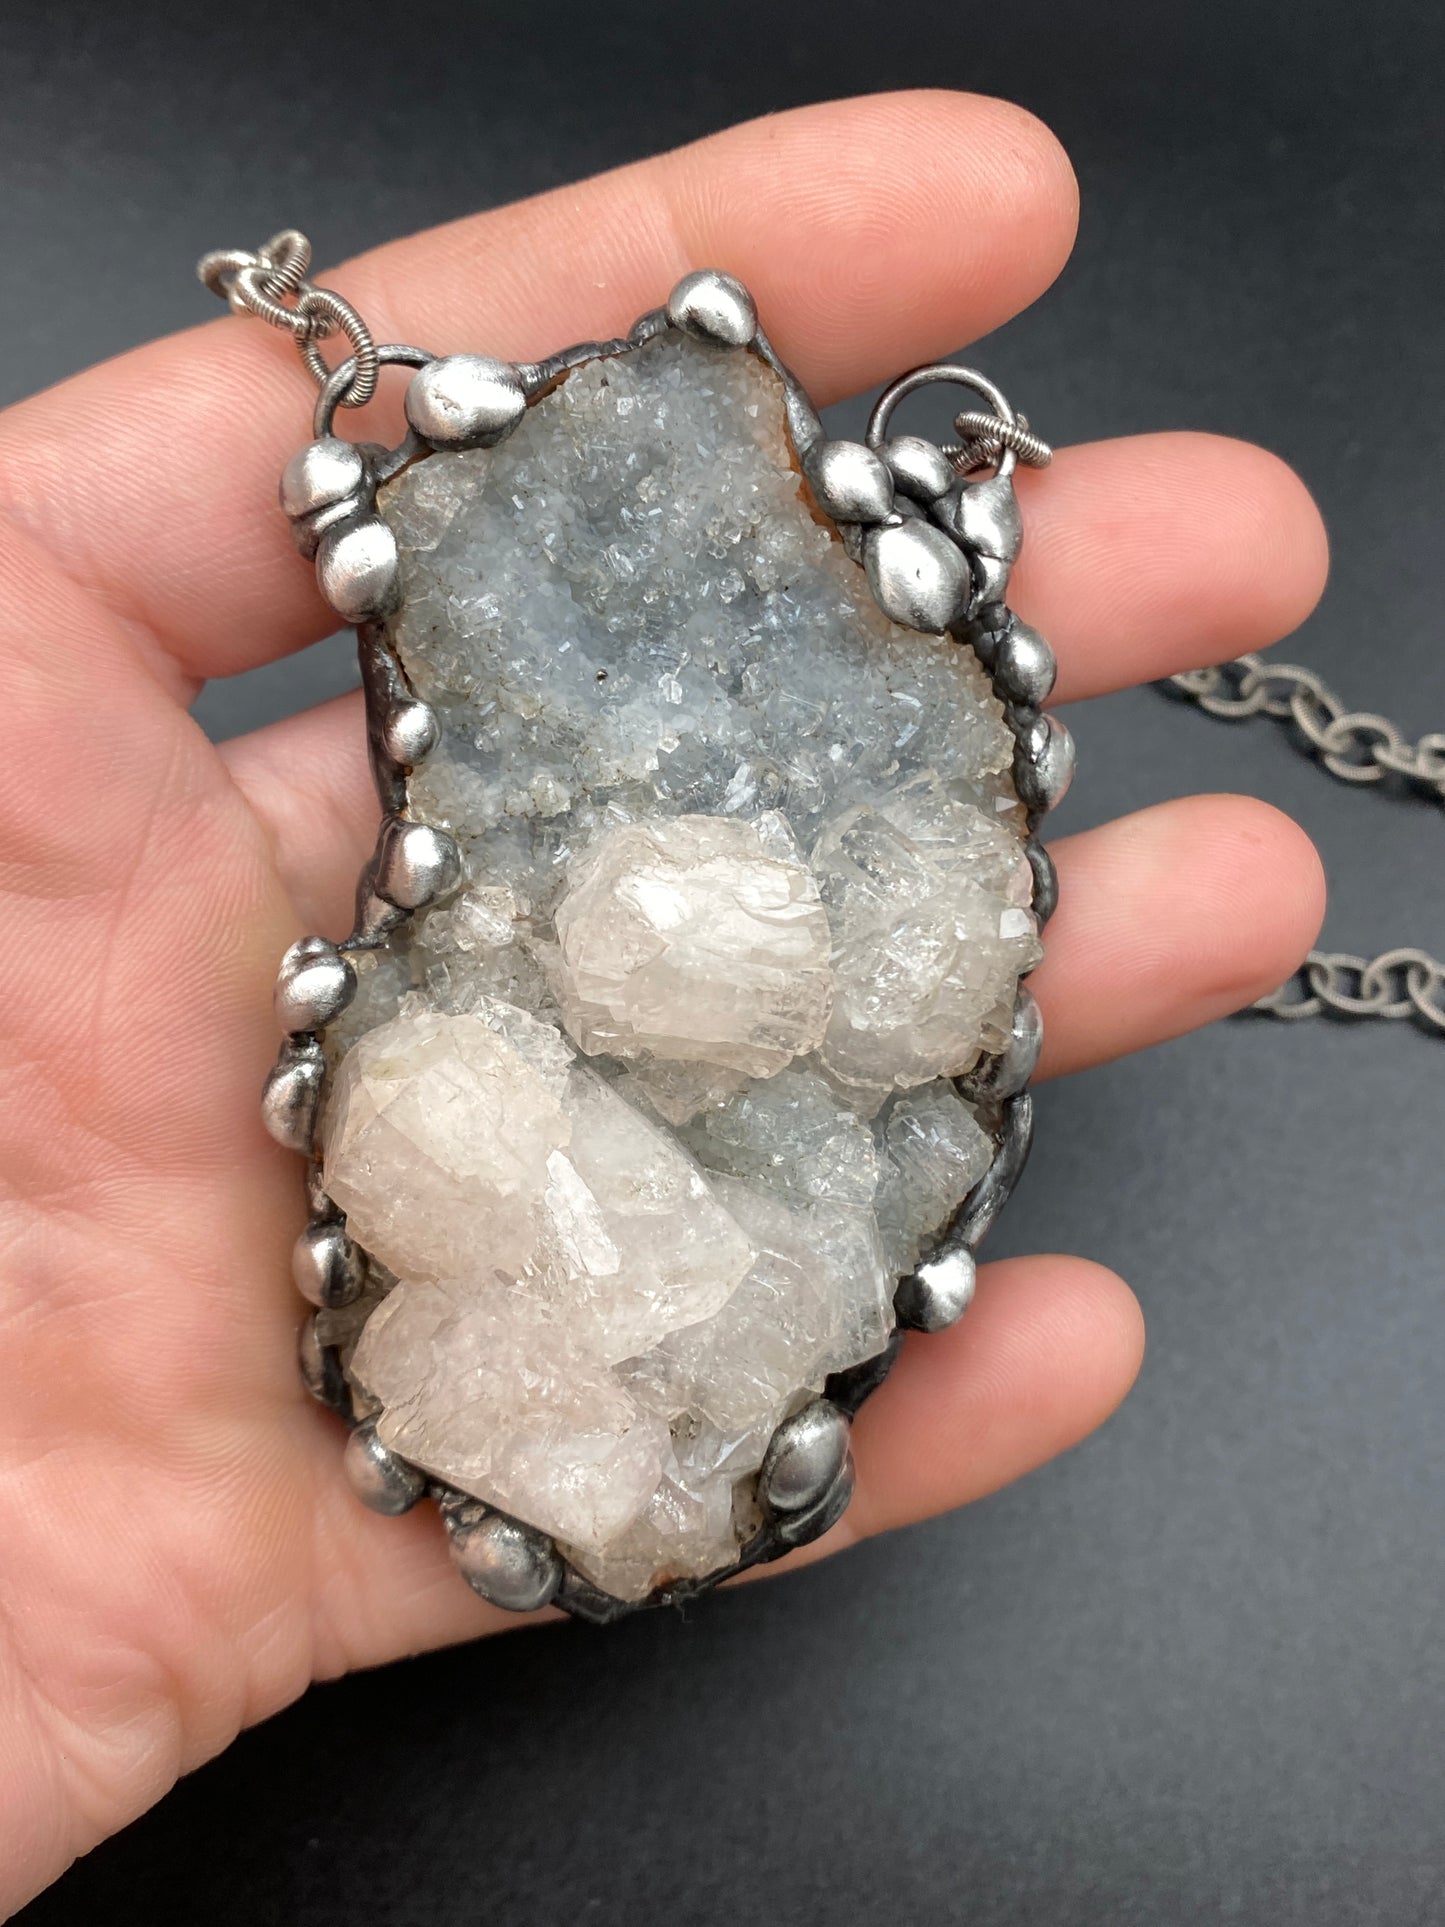 In The Clouds ~ Chalcedony & Apophylite Necklace